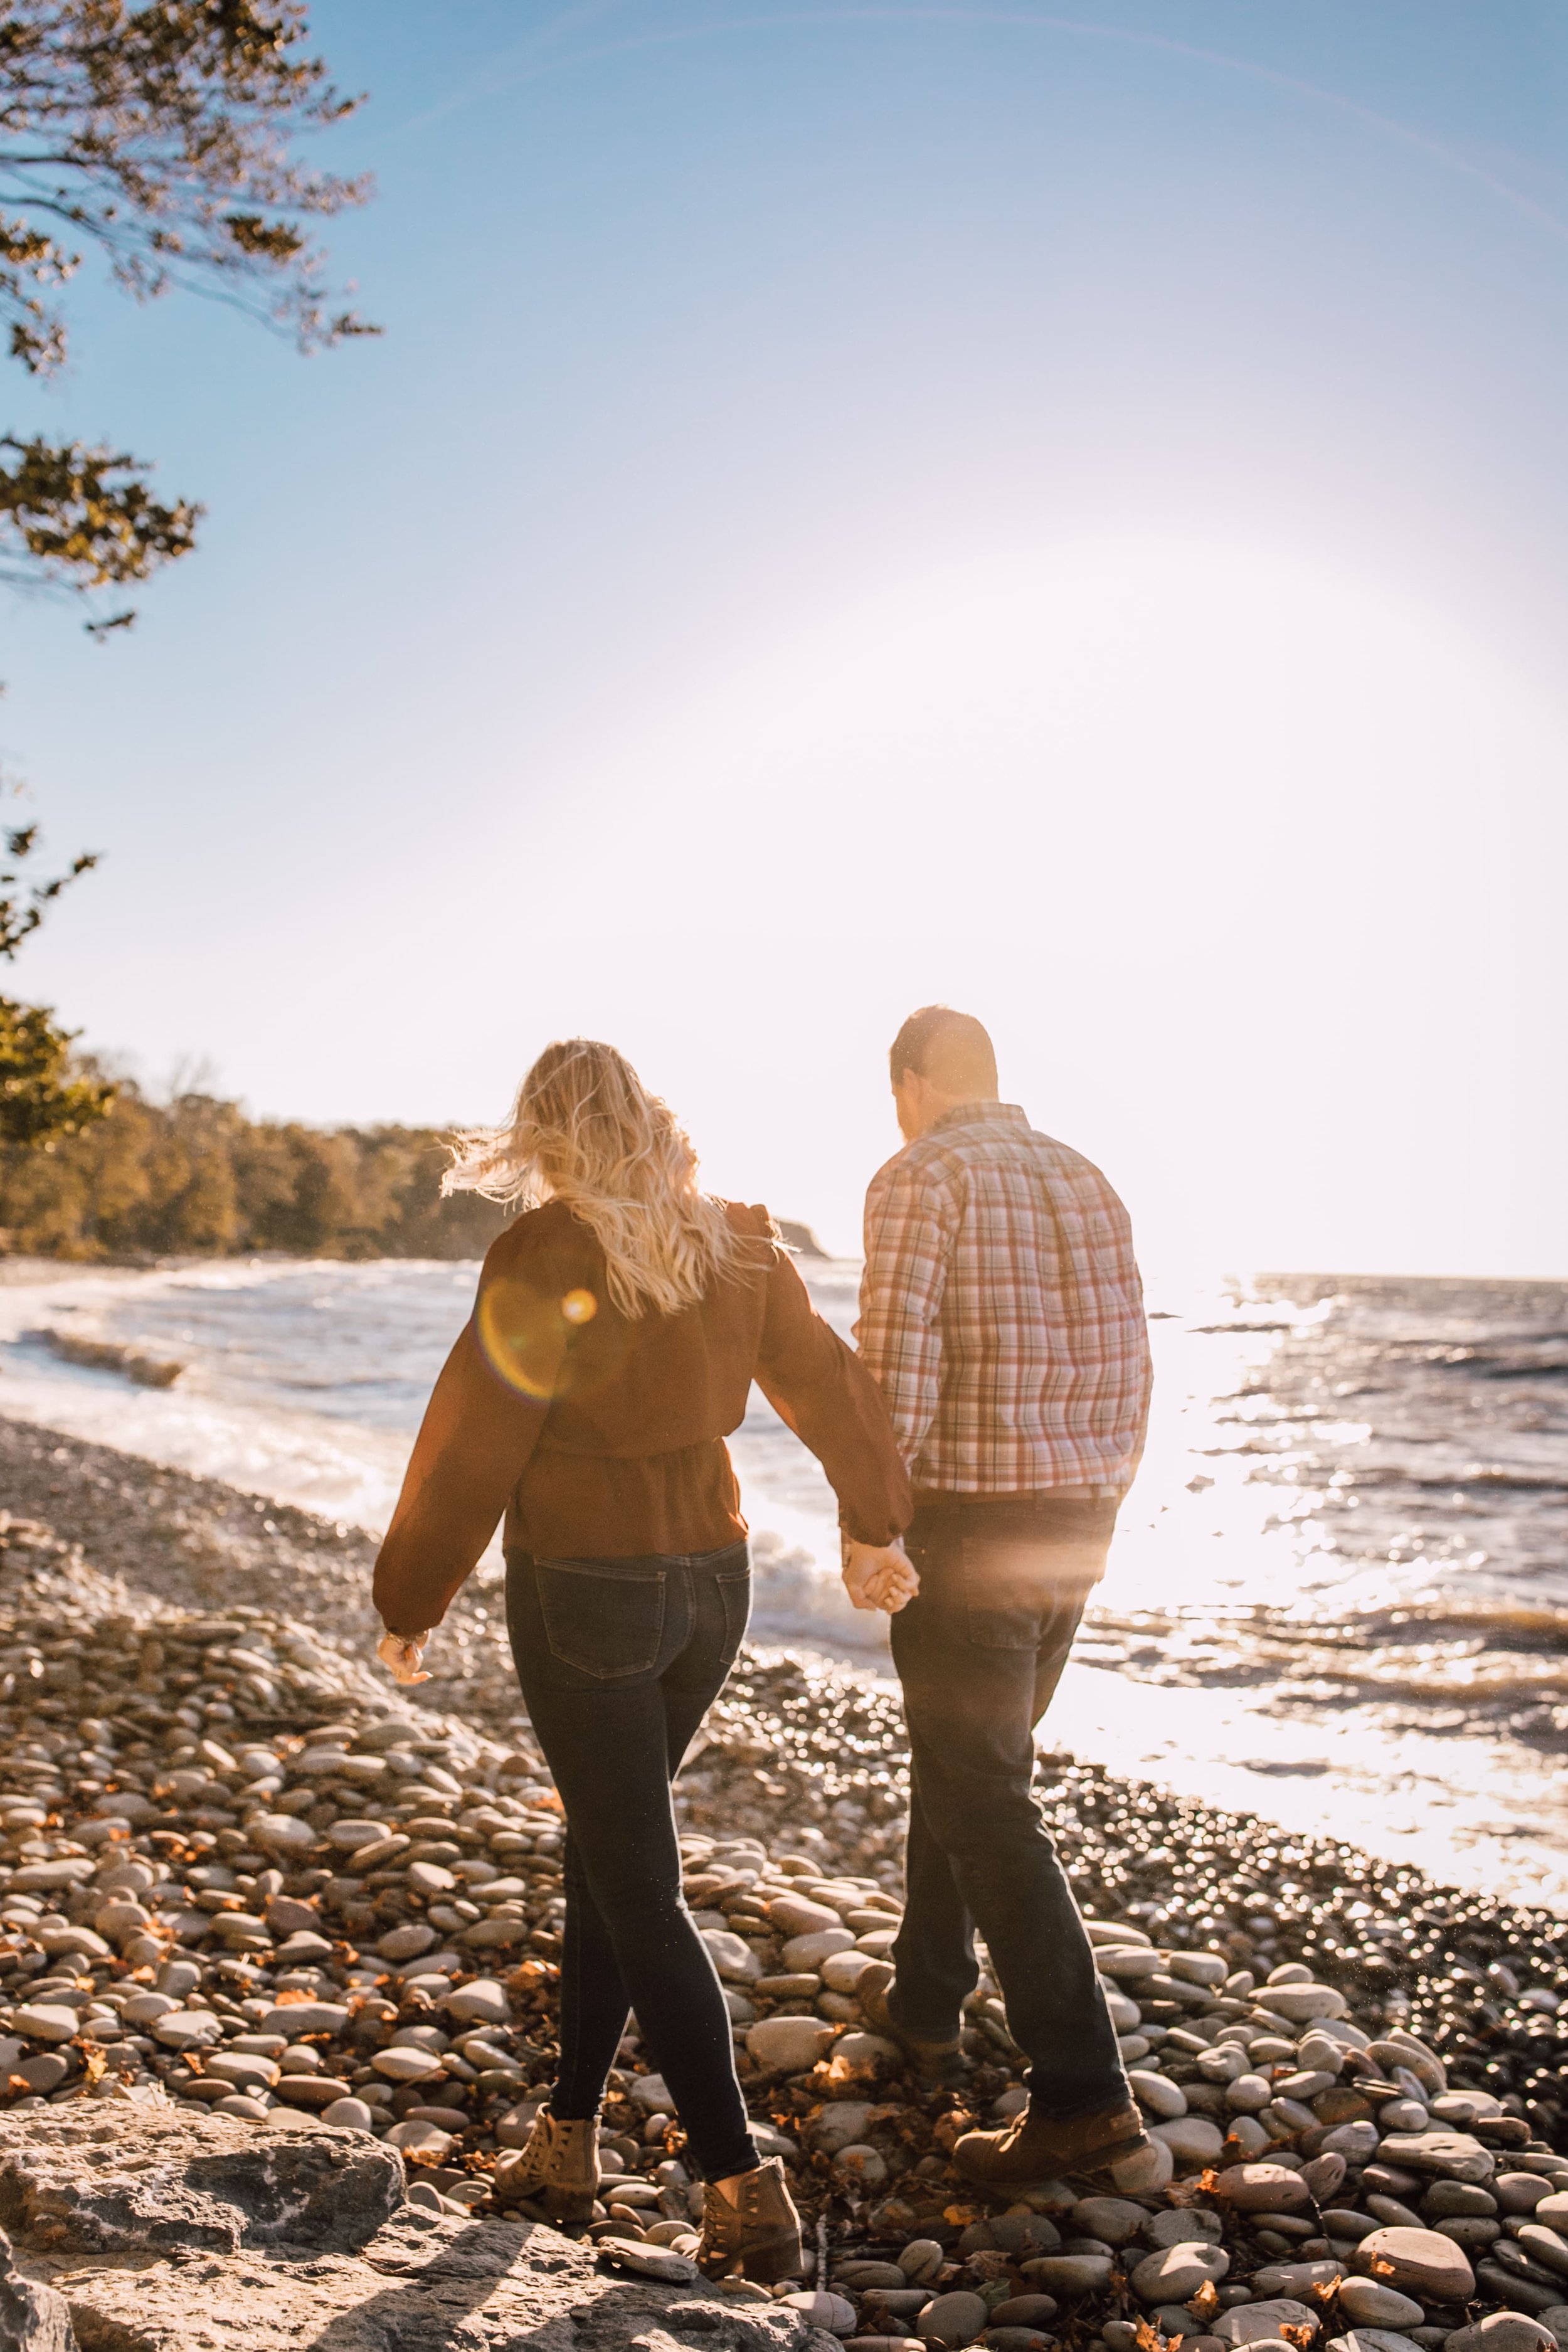  sun flares decorate this photo of an engaged couple walking hand in hand down a rocky beach on the shore of a great lake for their lake engagement photos 